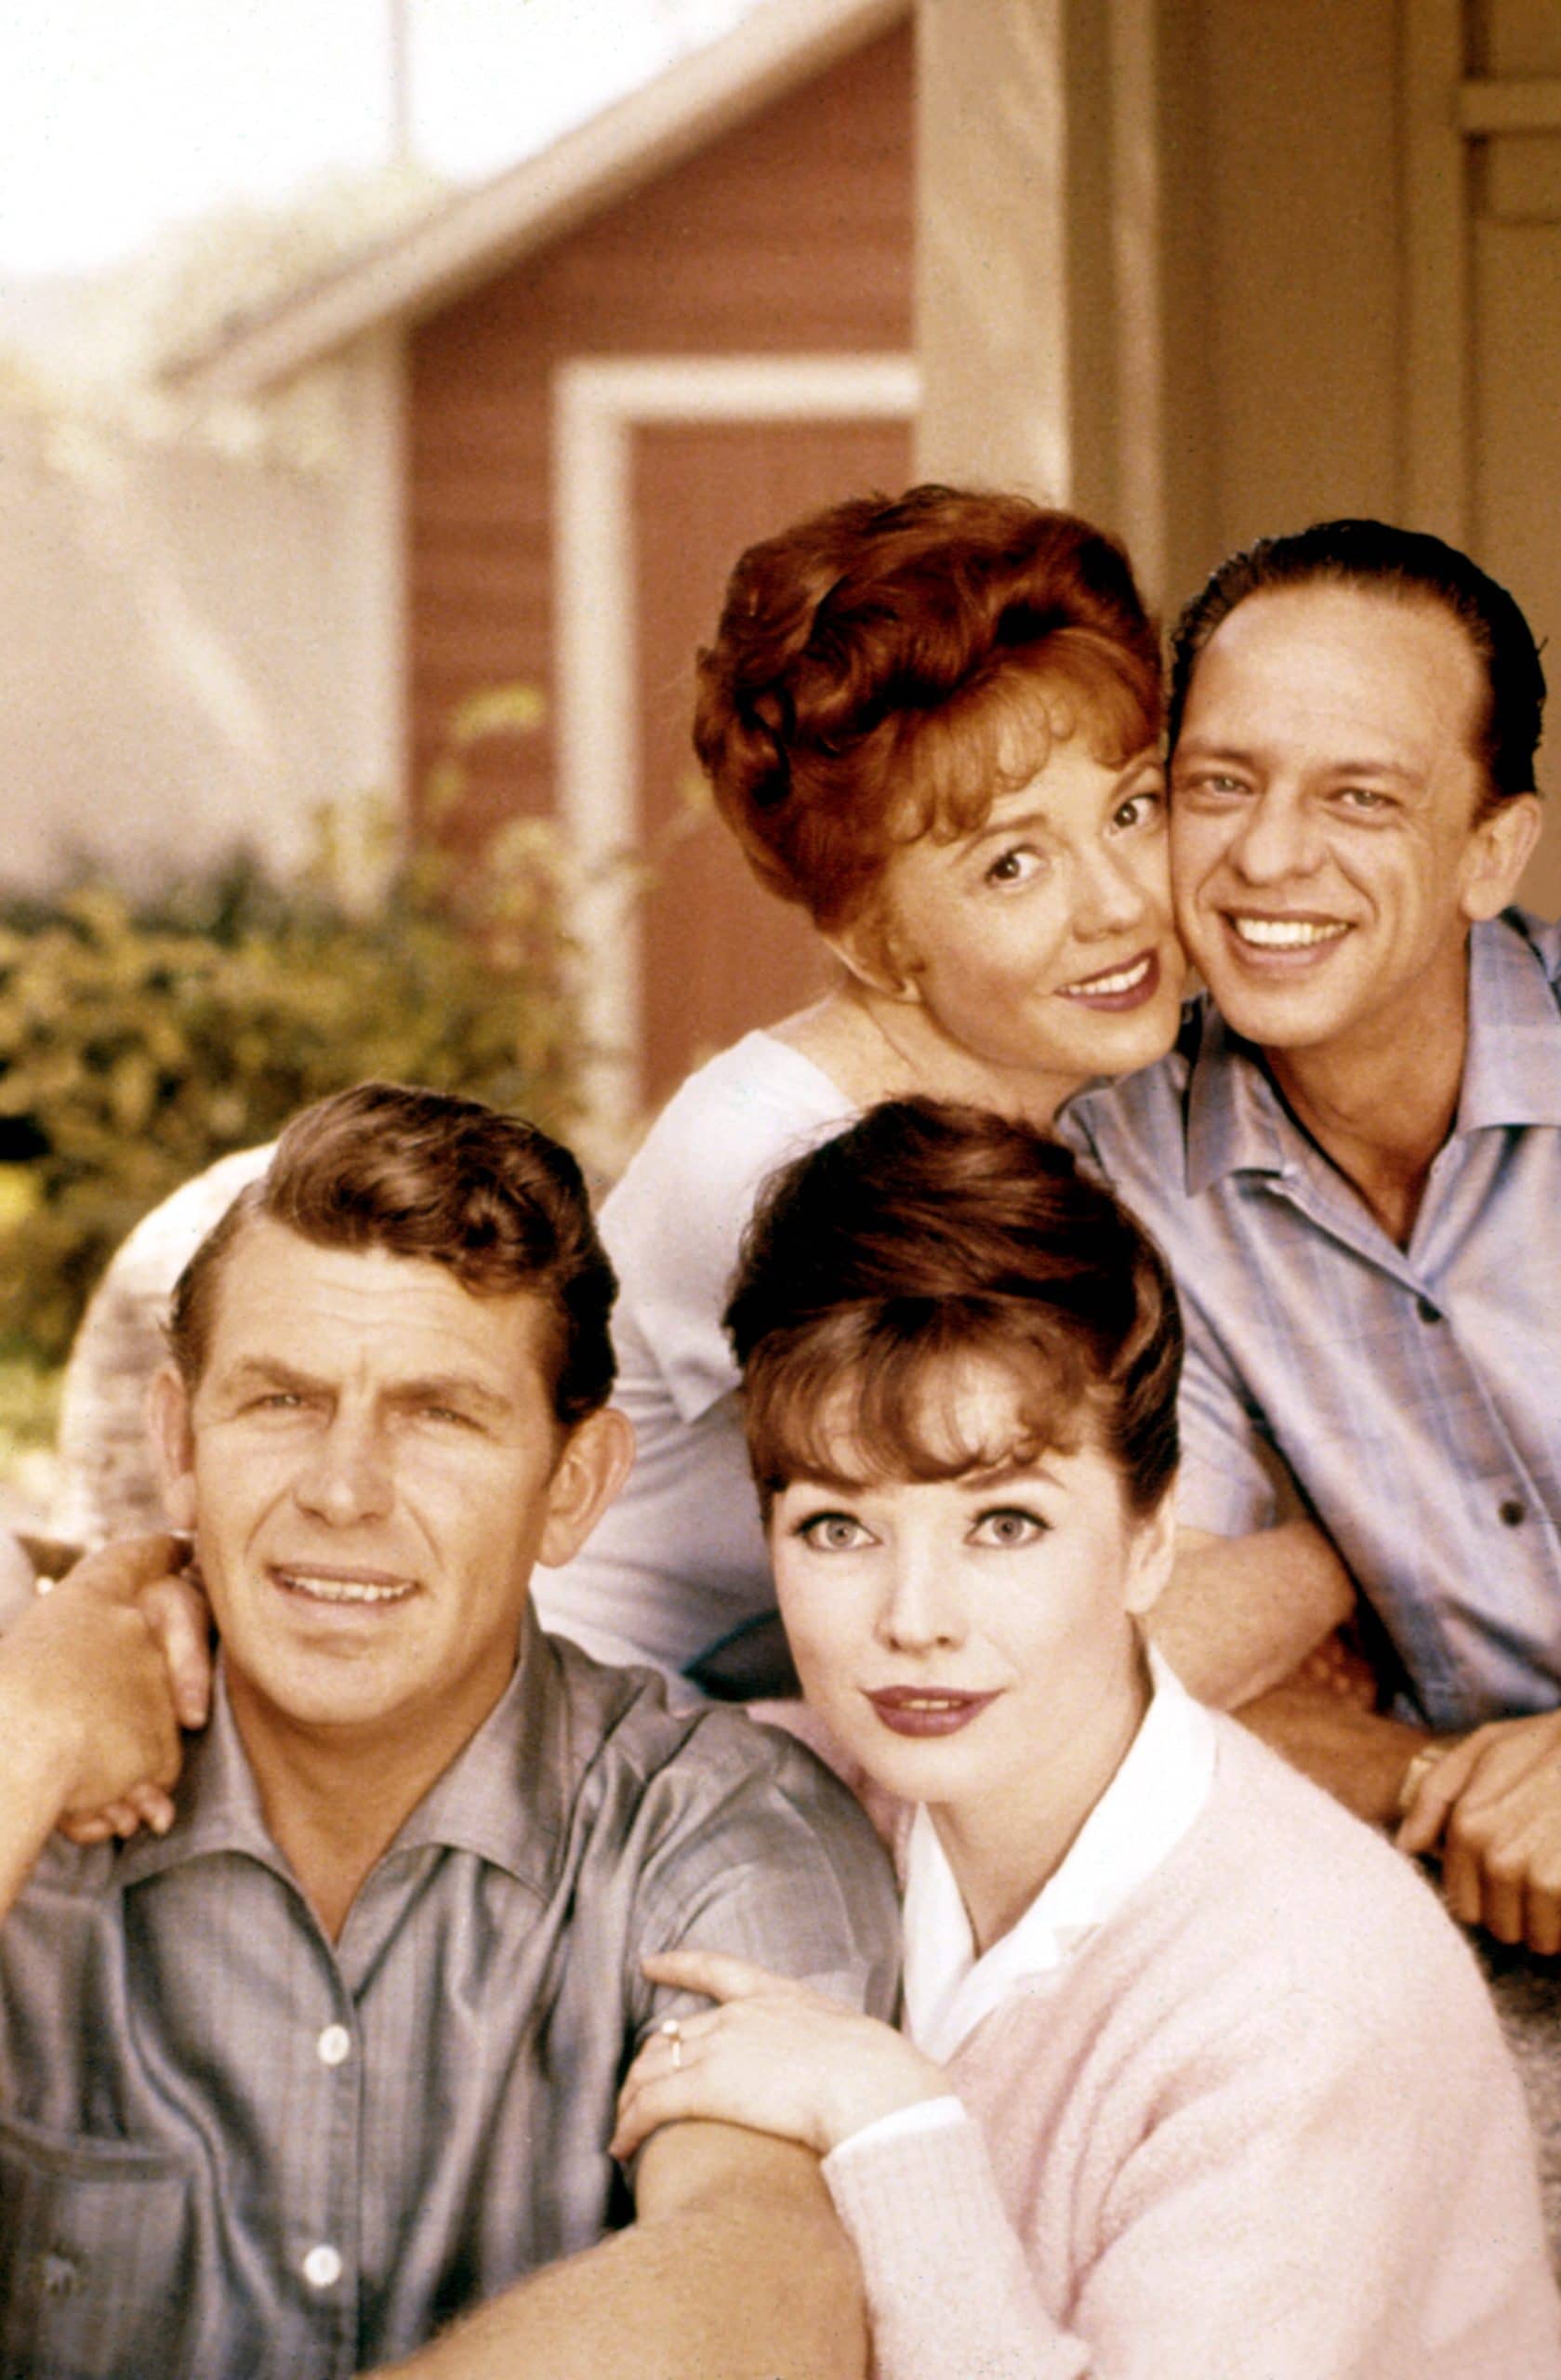 THE ANDY GRIFFITH SHOW, Betty Lynn, Don Knotts, Aneta Corseaut, Andy Griffith, Season 5, 1964-1965